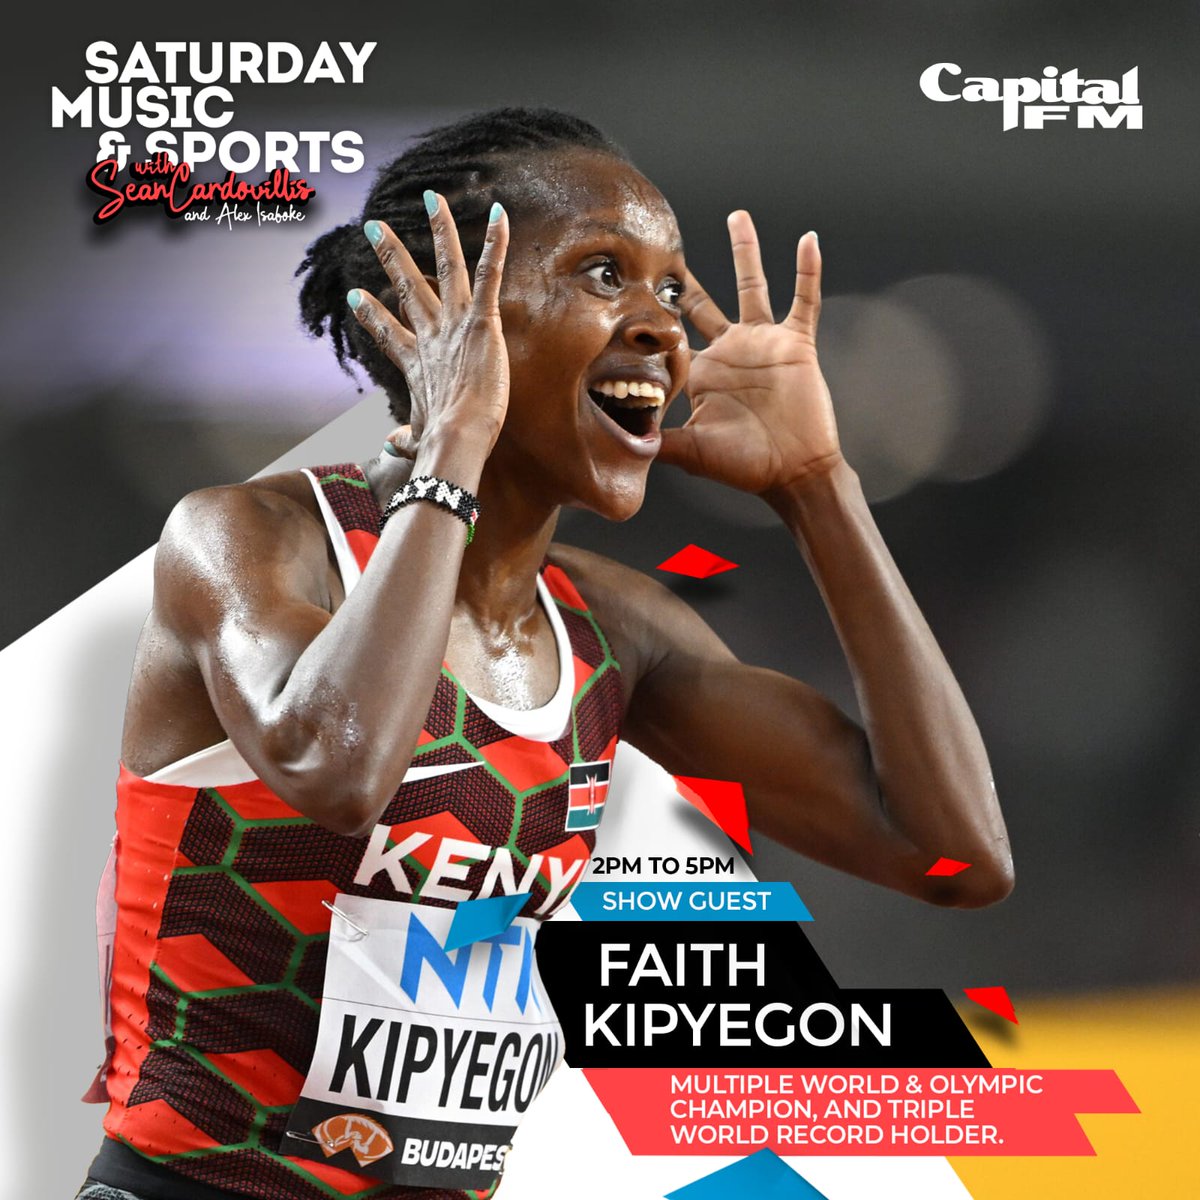 EXCLUSIVE: 3:30pm on Saturday Music & Sports, ONLY on @CapitalFMKenya. cc: @alexisaboke #seanknows